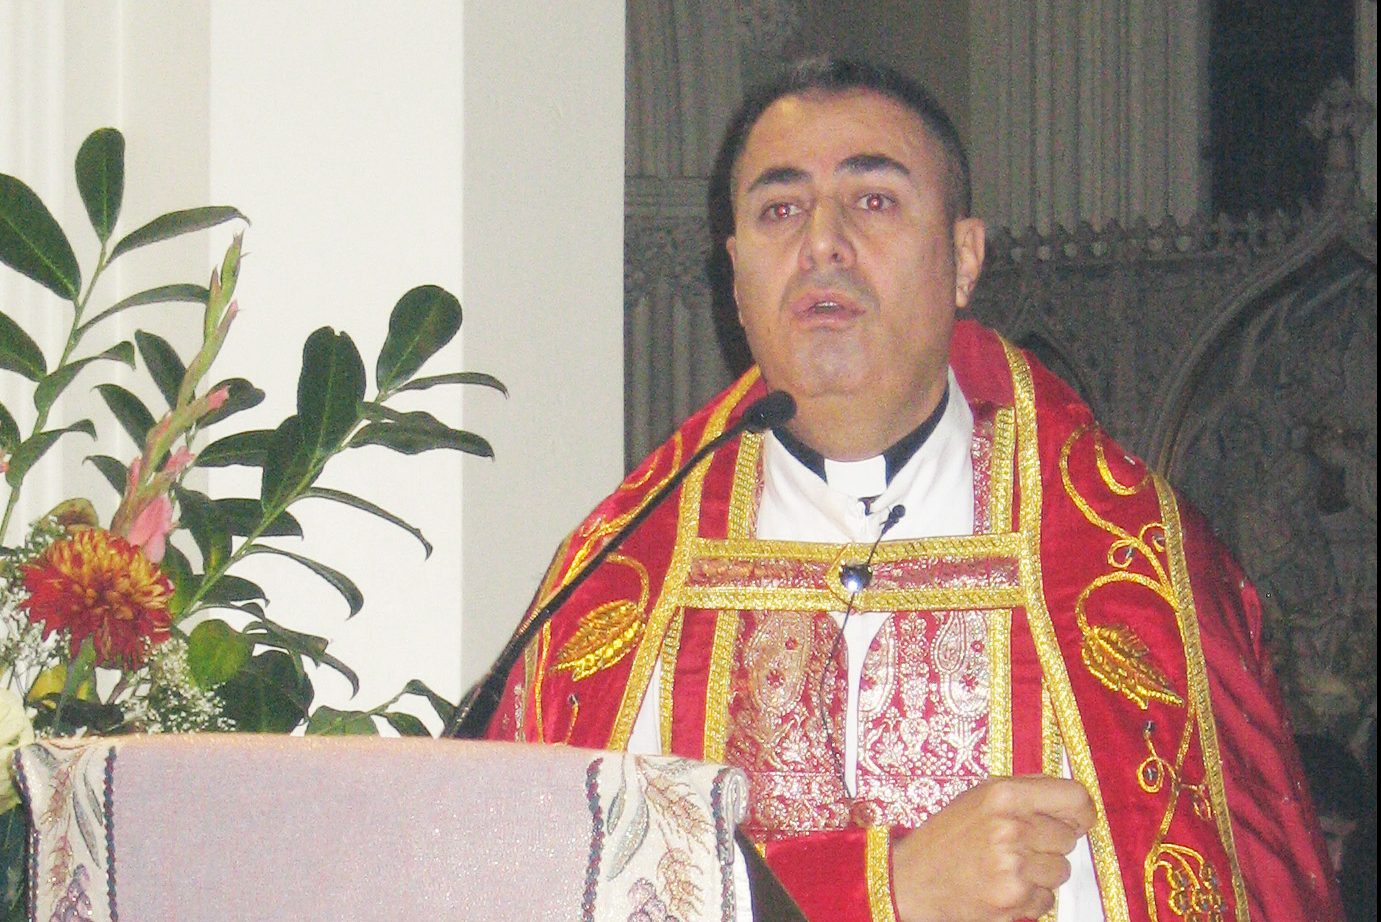 With picture of Syriac Catholic Archbishop Nathaniel Nizar Semaan (© Aid to the Church in Need)